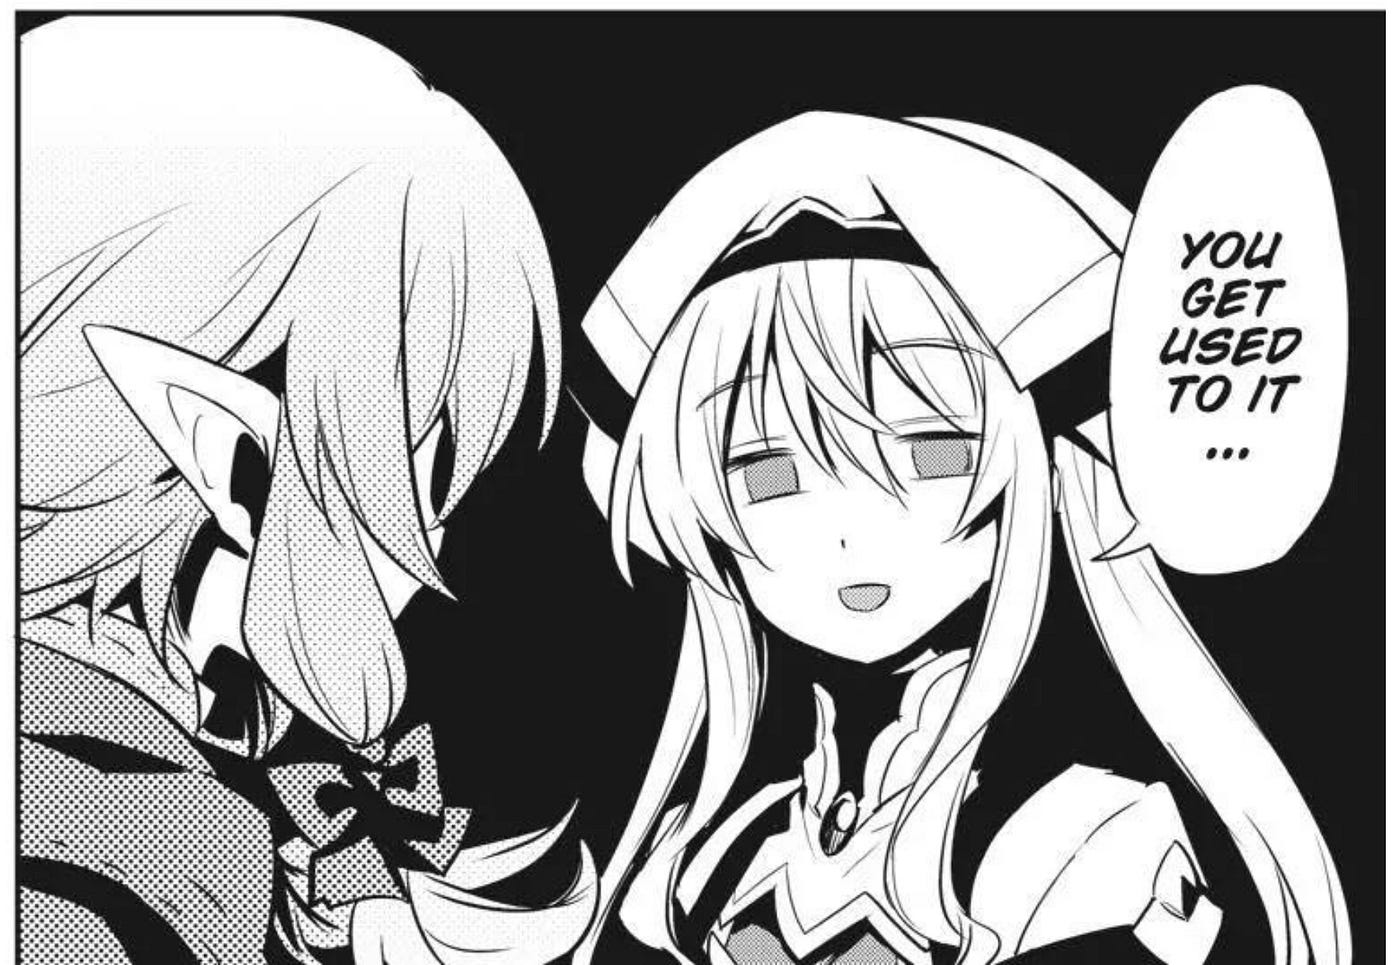 Goblin Slayer's Return Gives Fans What They Wanted: Gore & Controversy